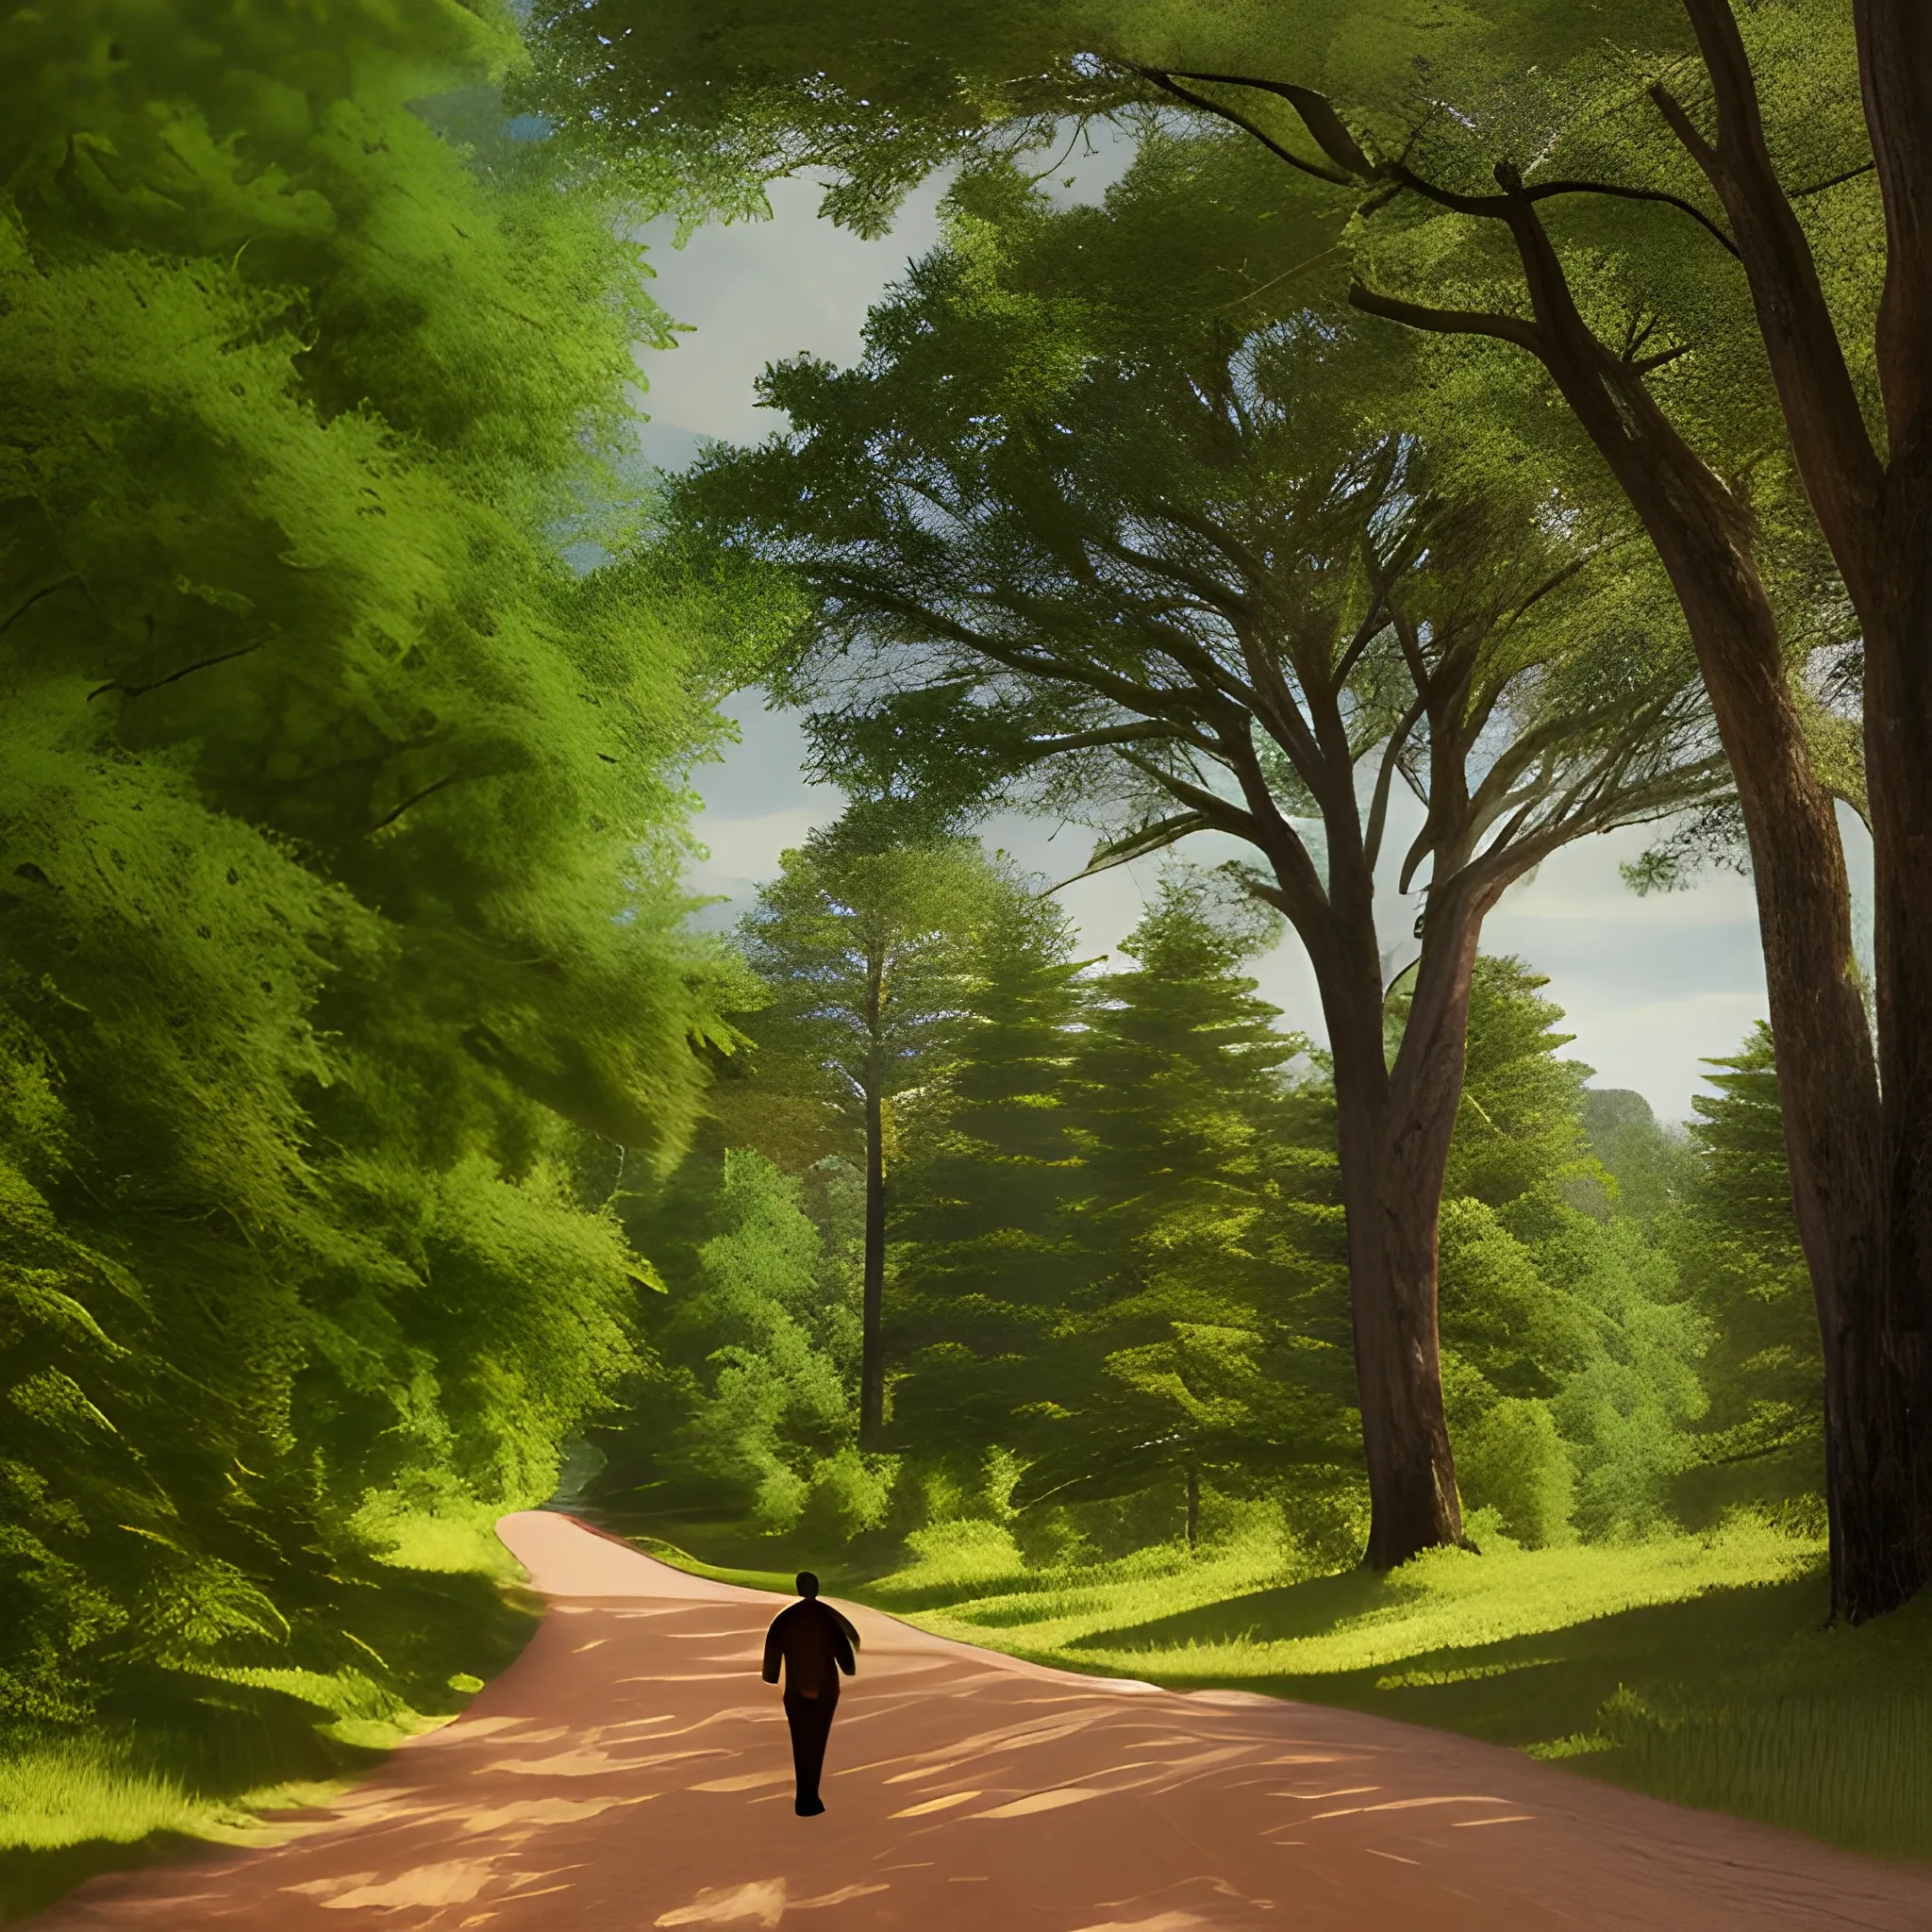 Landscape of a forest with large cedar trees. The leaves are lush green. There is a dirt road going down the middle with trees on either side. There are two figures walking down the road, backs facing the camera. One figure is a man that has red hair and simple medieval garb. The other figure is a woman with long brown hair and a plain white dress. High quality. Realistic. Medieval times. 